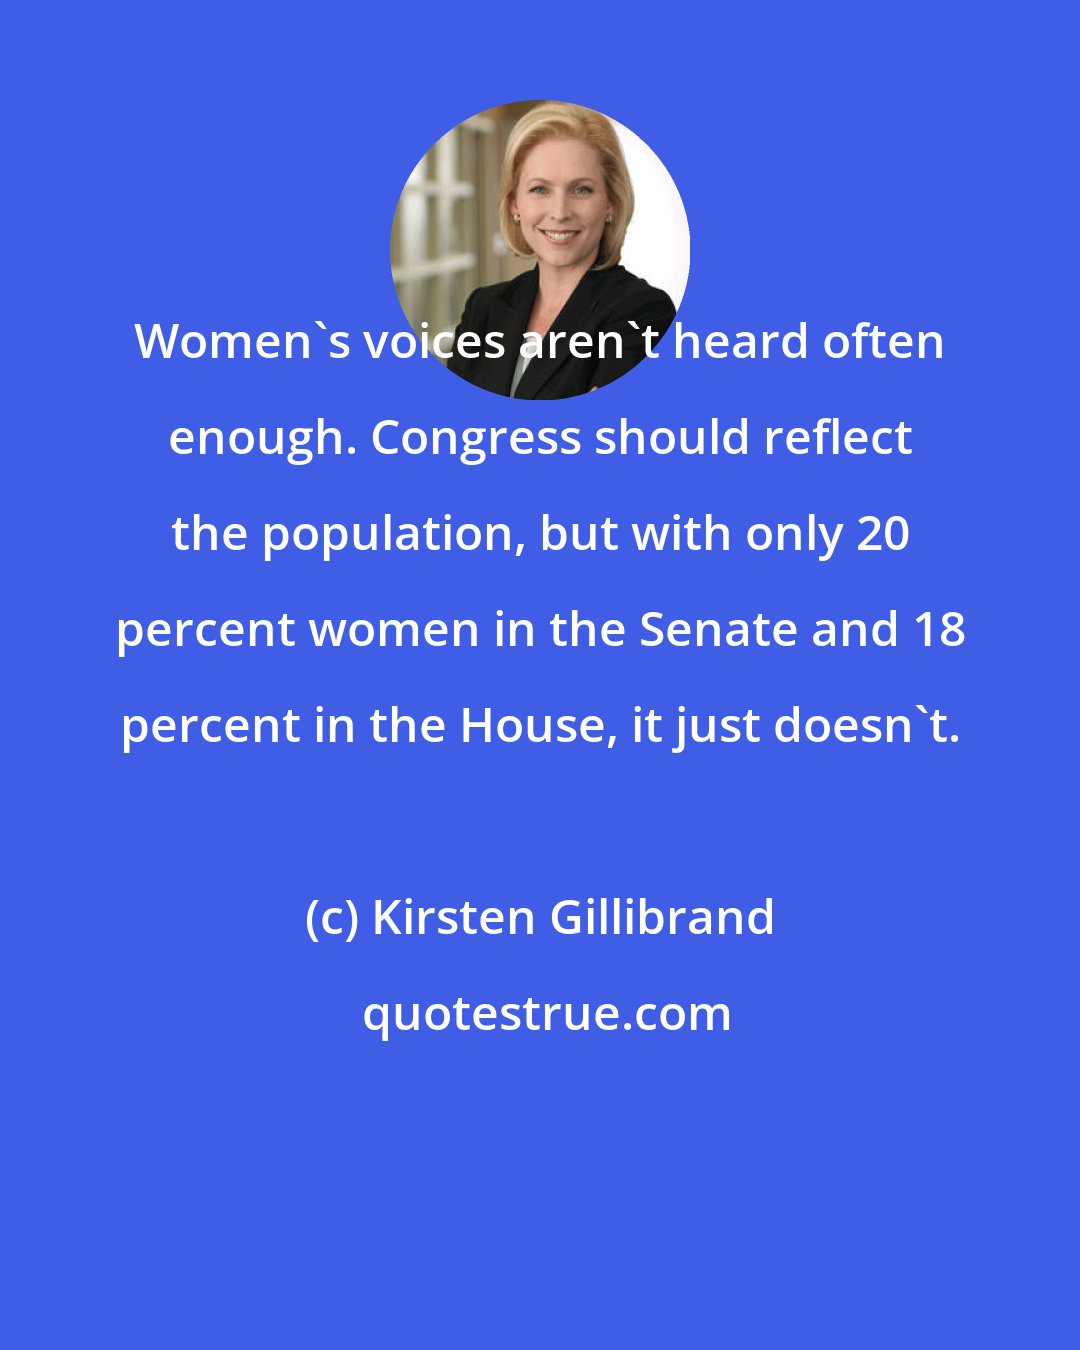 Kirsten Gillibrand: Women's voices aren't heard often enough. Congress should reflect the population, but with only 20 percent women in the Senate and 18 percent in the House, it just doesn't.